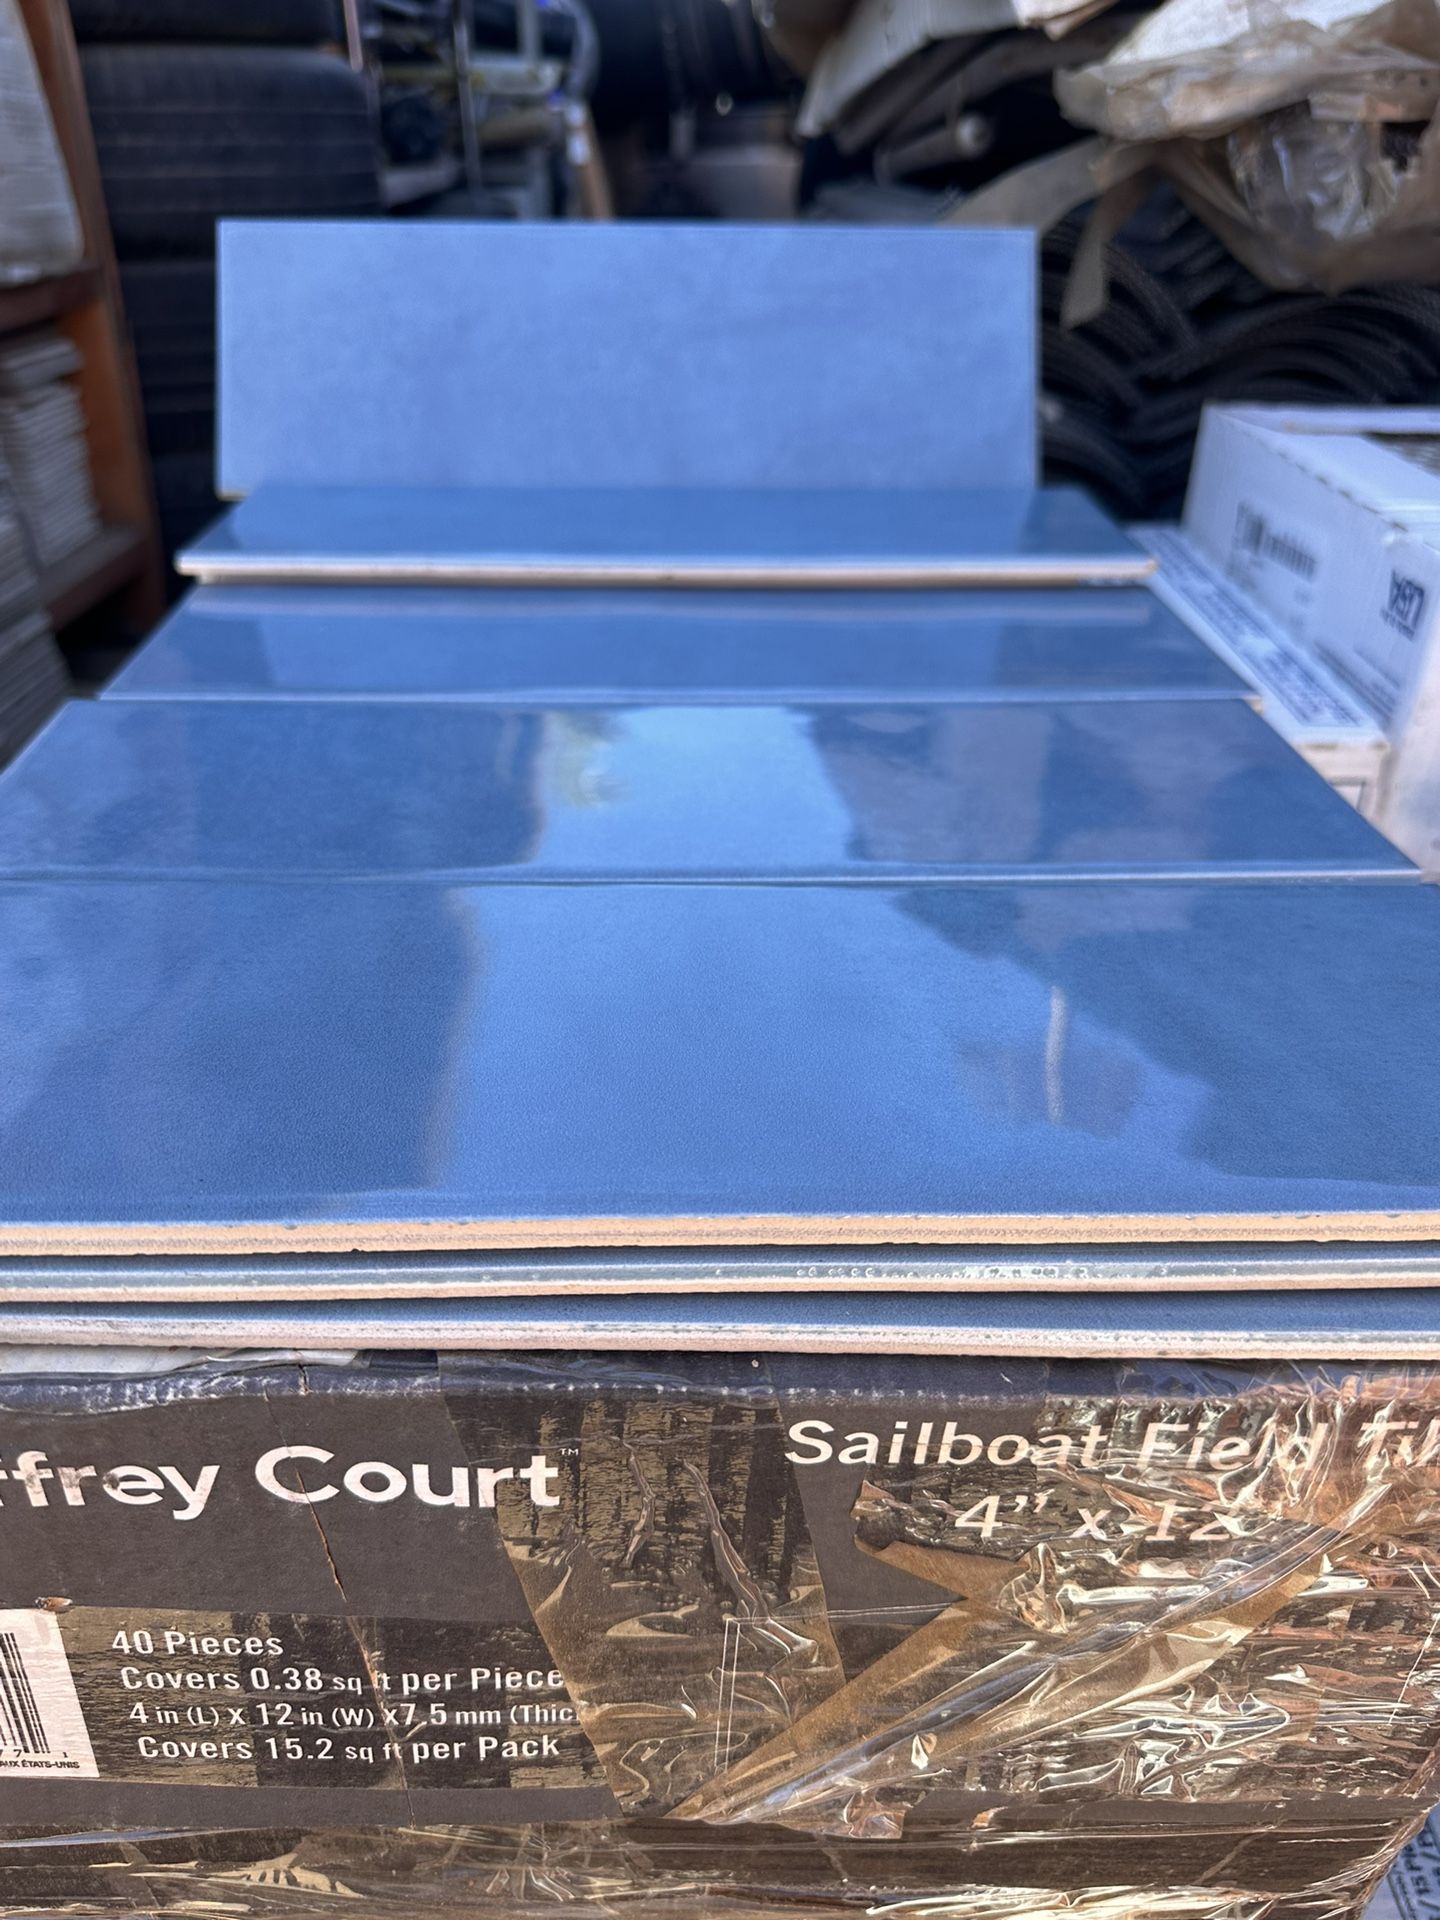 53 fts Sailboat Blue 4 in. x 12 in. Subway Gloss Textured Ceramic Wall Tile  new in box Also we have edger  tiles $15 por box edgers  we located in He